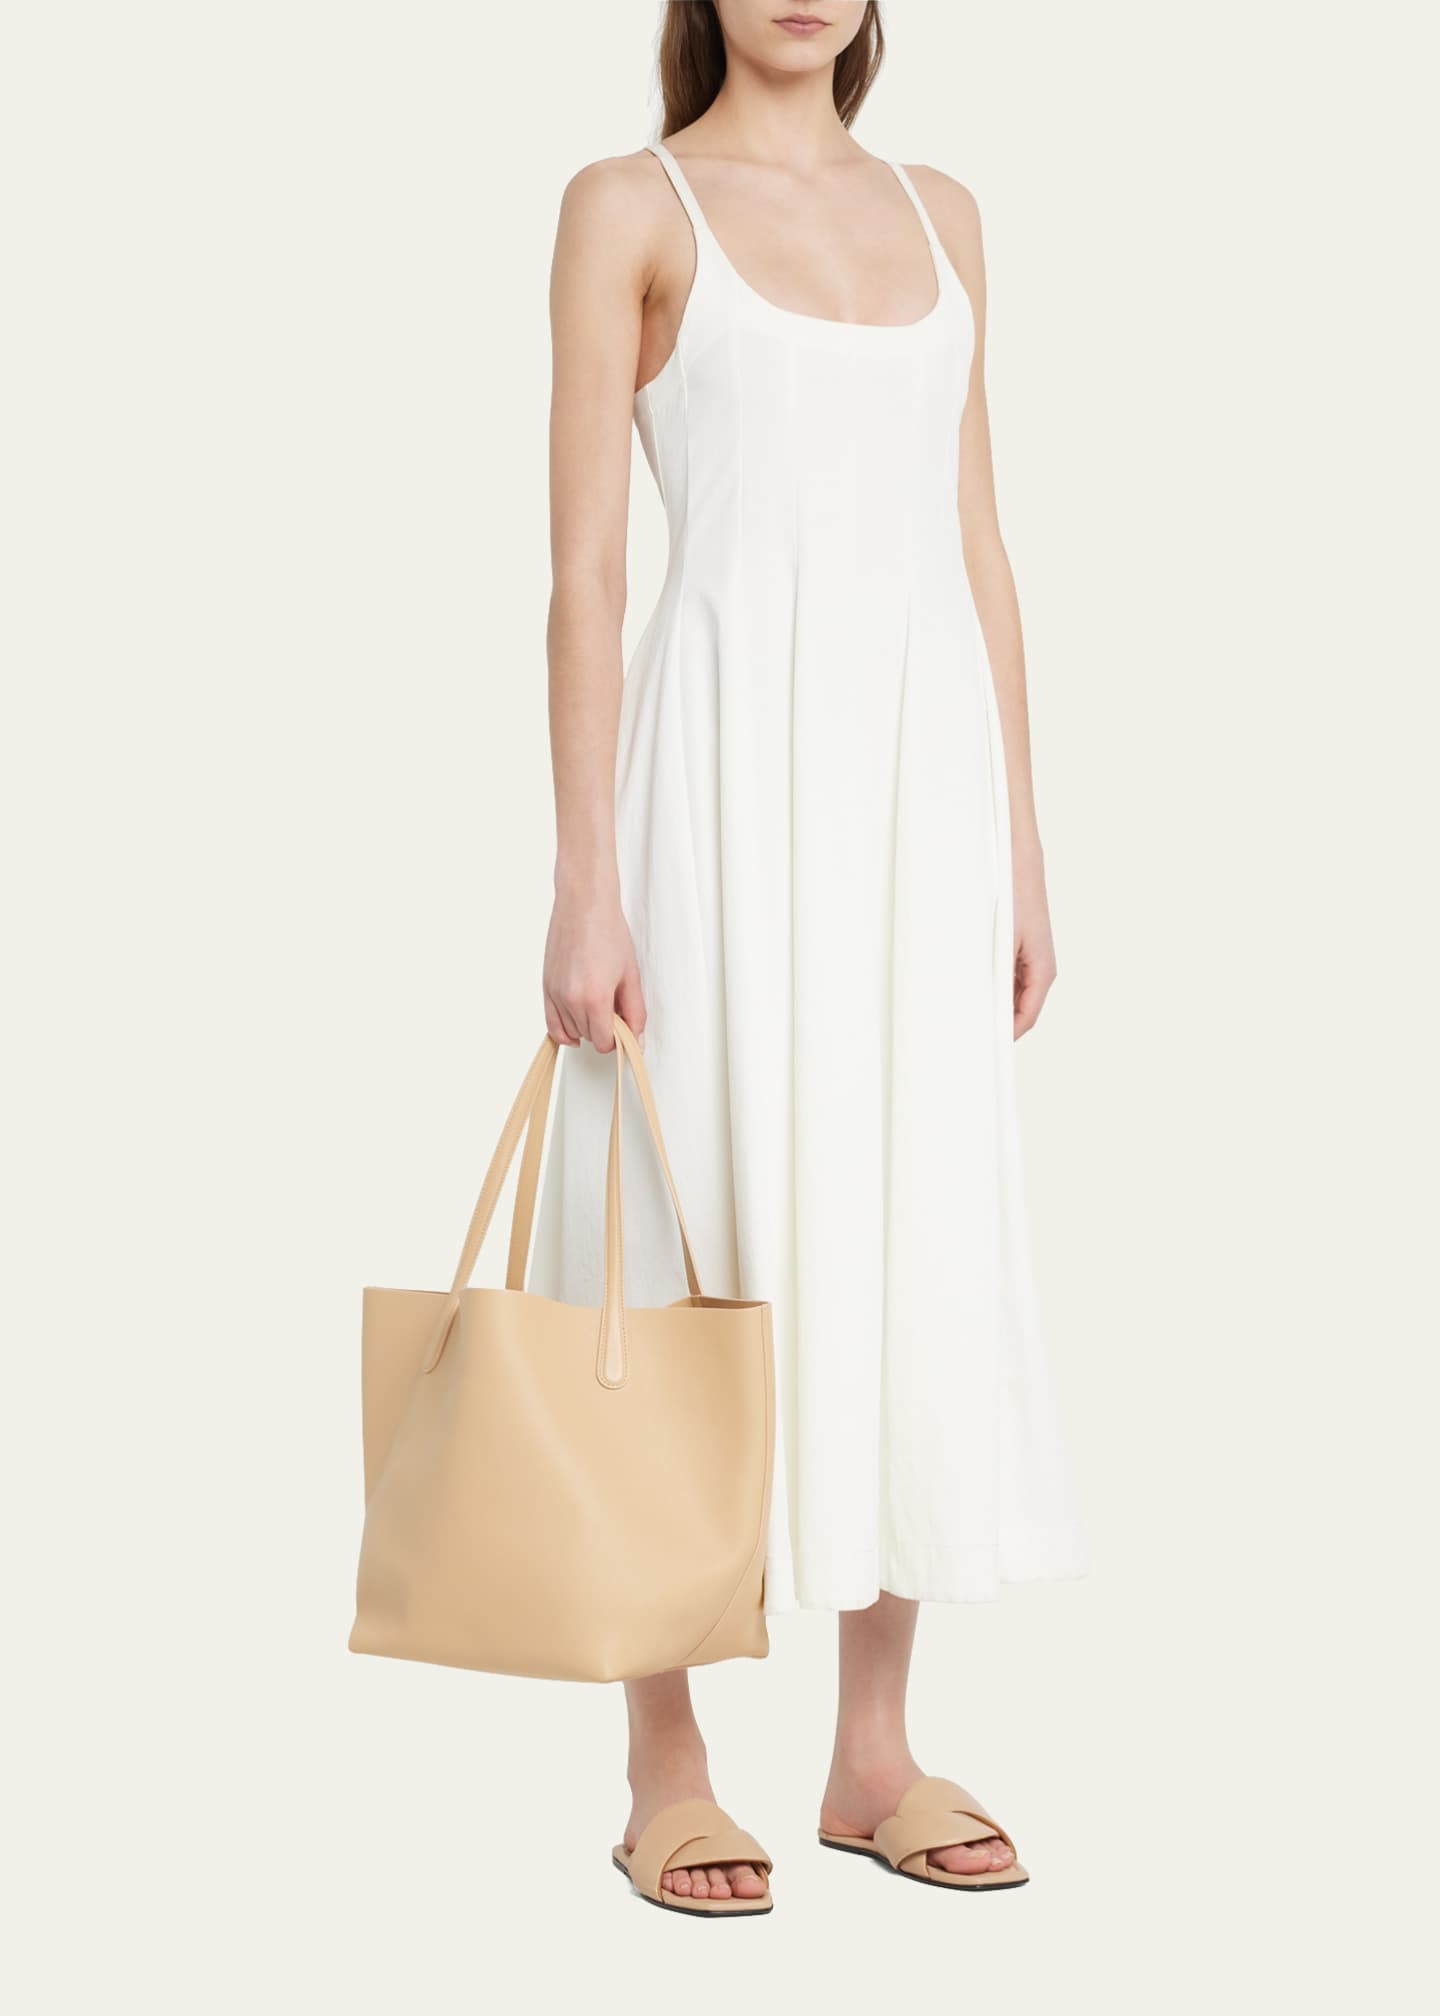 Everyday Soft Tote - Caramel by Mansur Gavriel at ORCHARD MILE